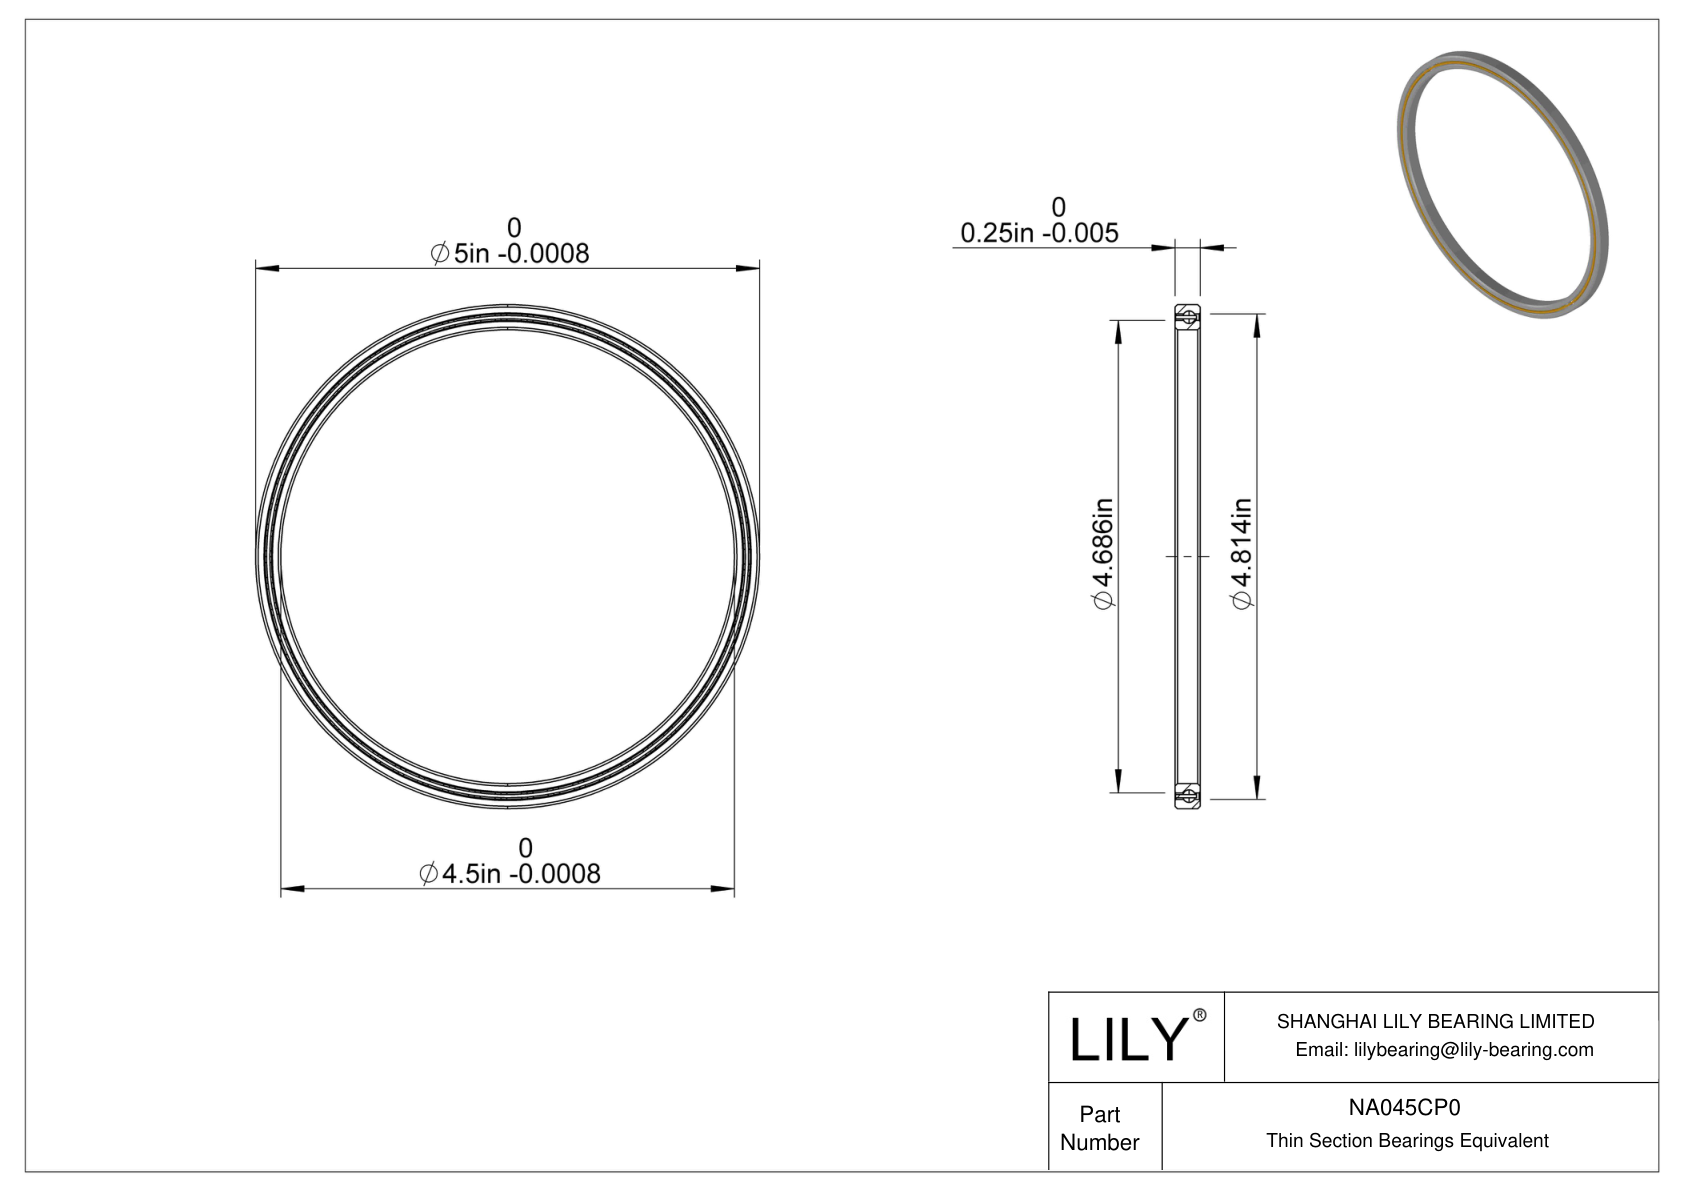 NA045CP0 Constant Section (CS) Bearings cad drawing